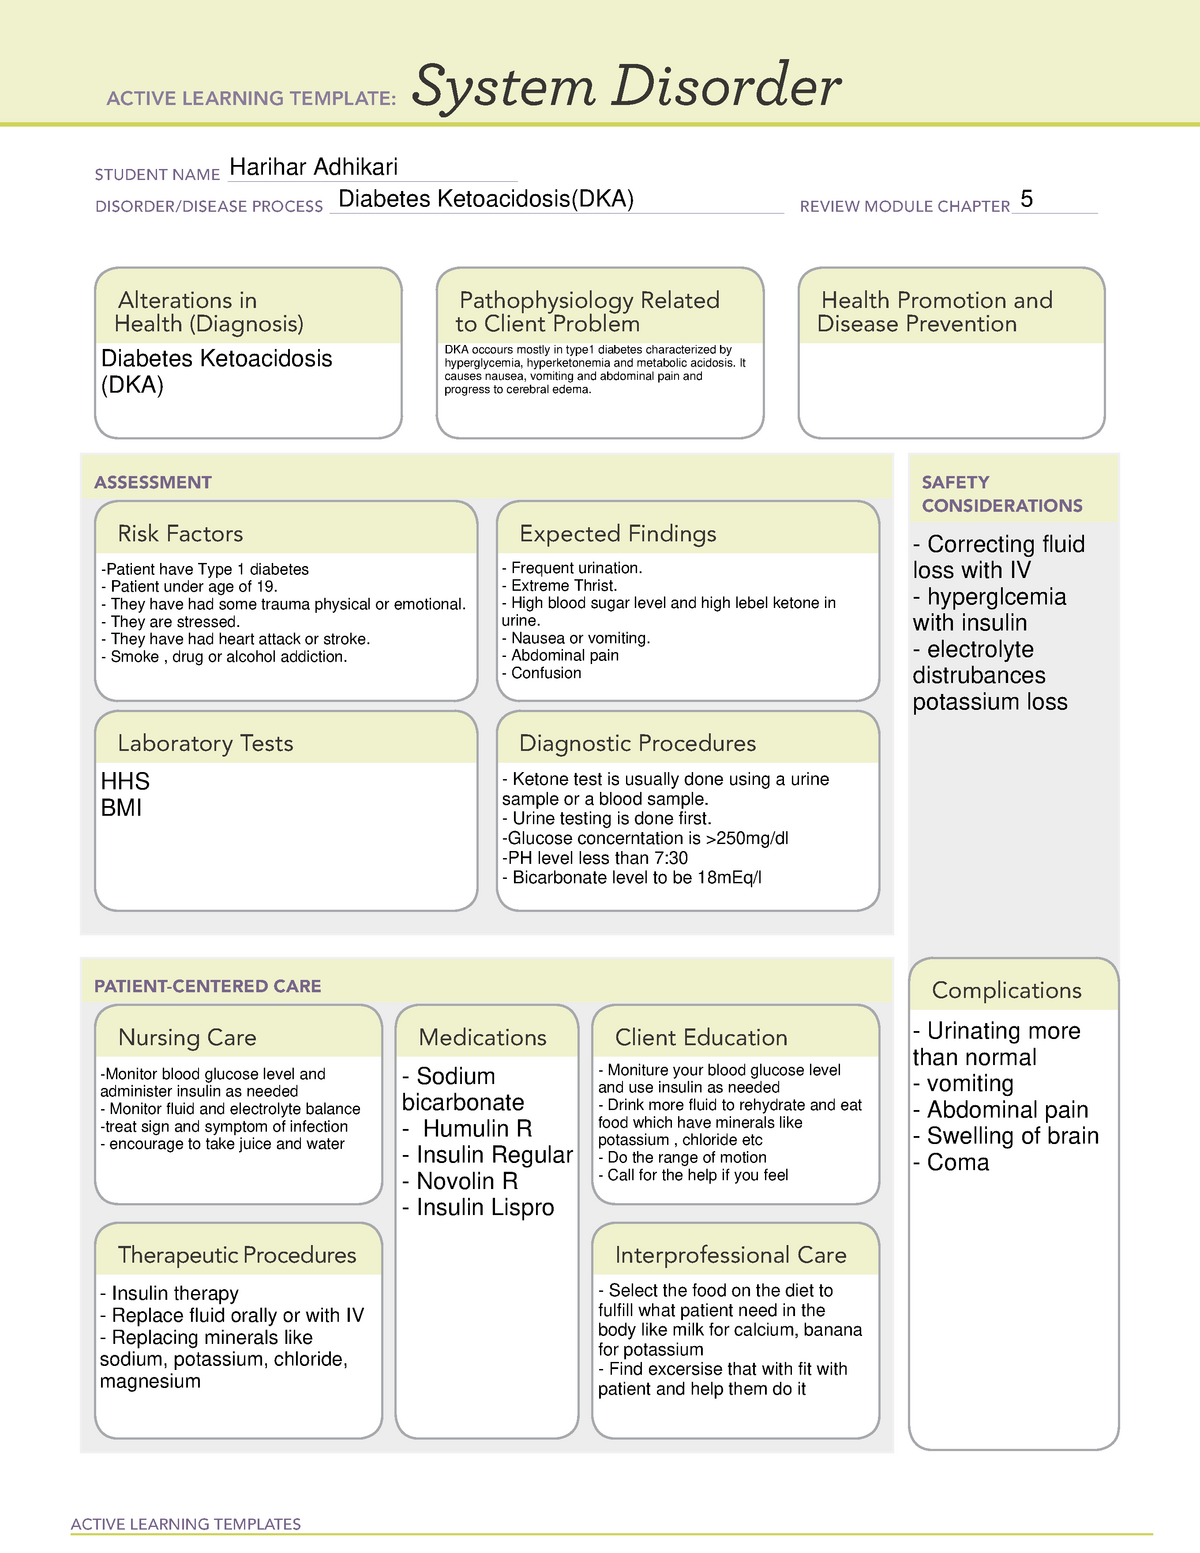 Dka know the disease ACTIVE LEARNING TEMPLATES System Disorder